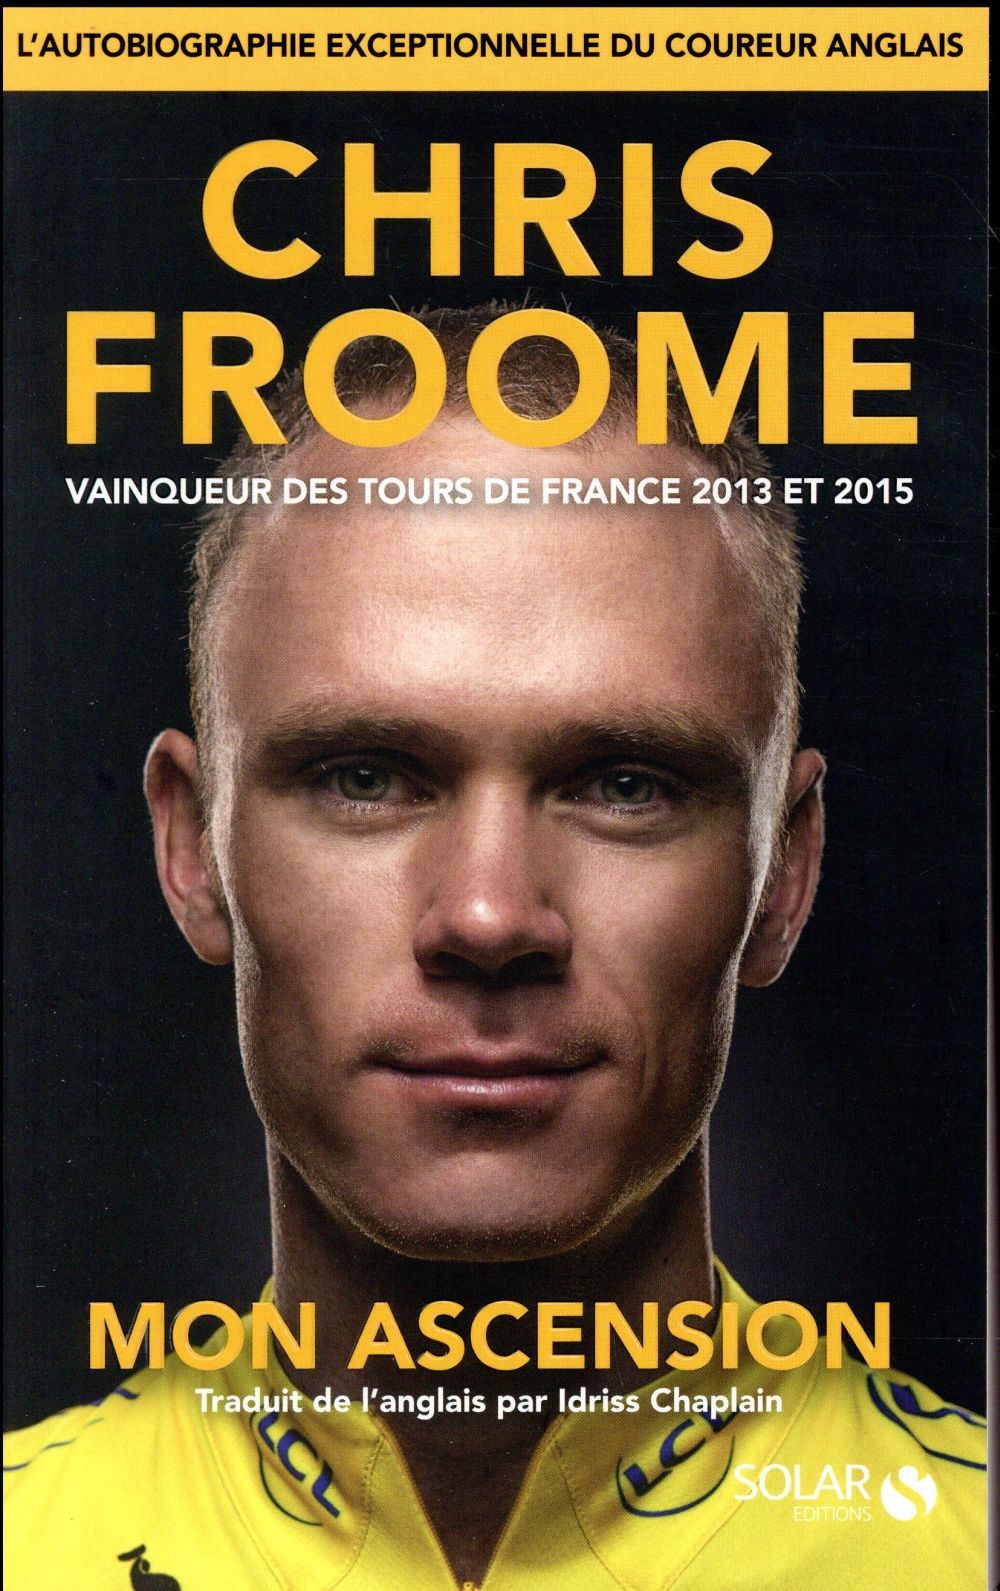 CHRIS FROOME - MON ASCENSION